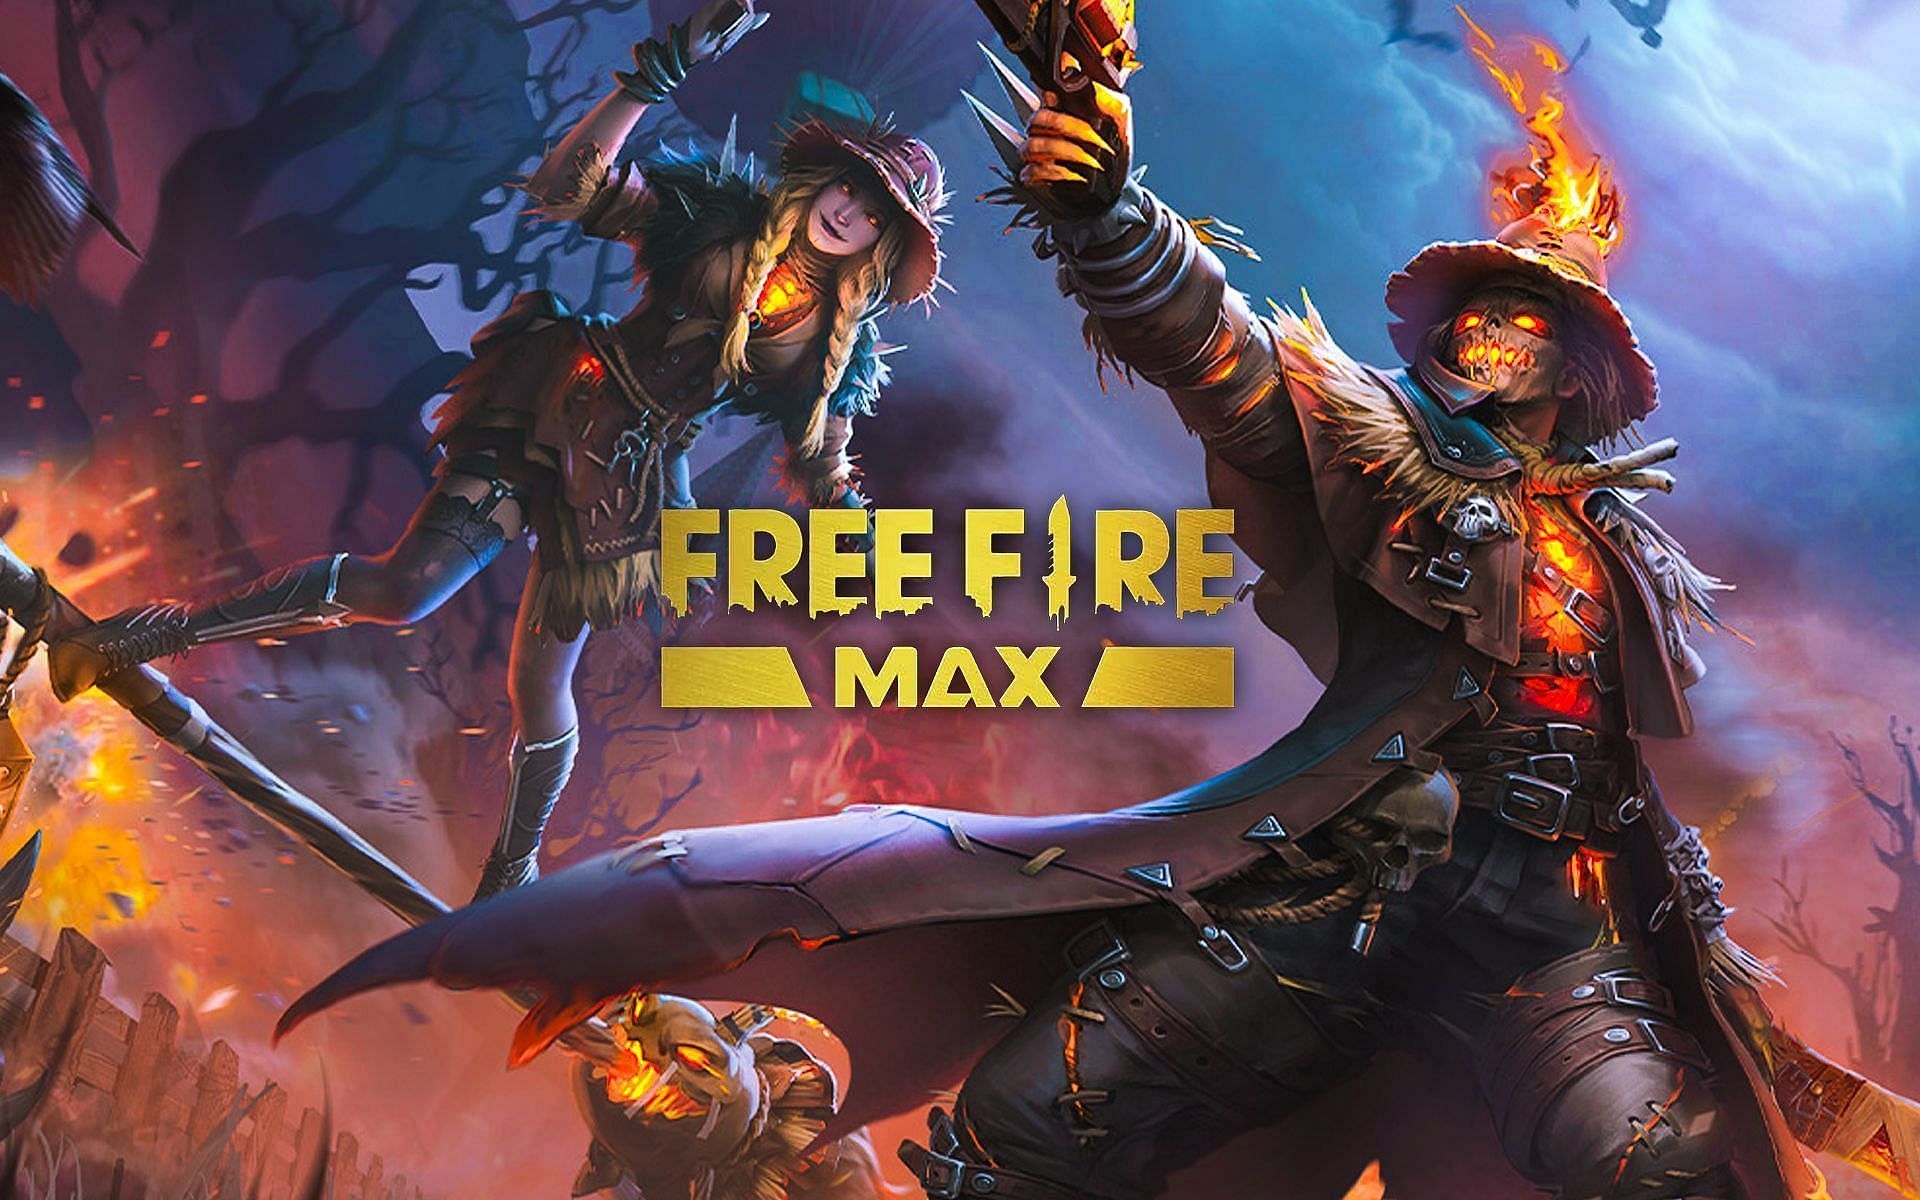 Free Fire Game Online: How to Download, Photos & Free Fire Max